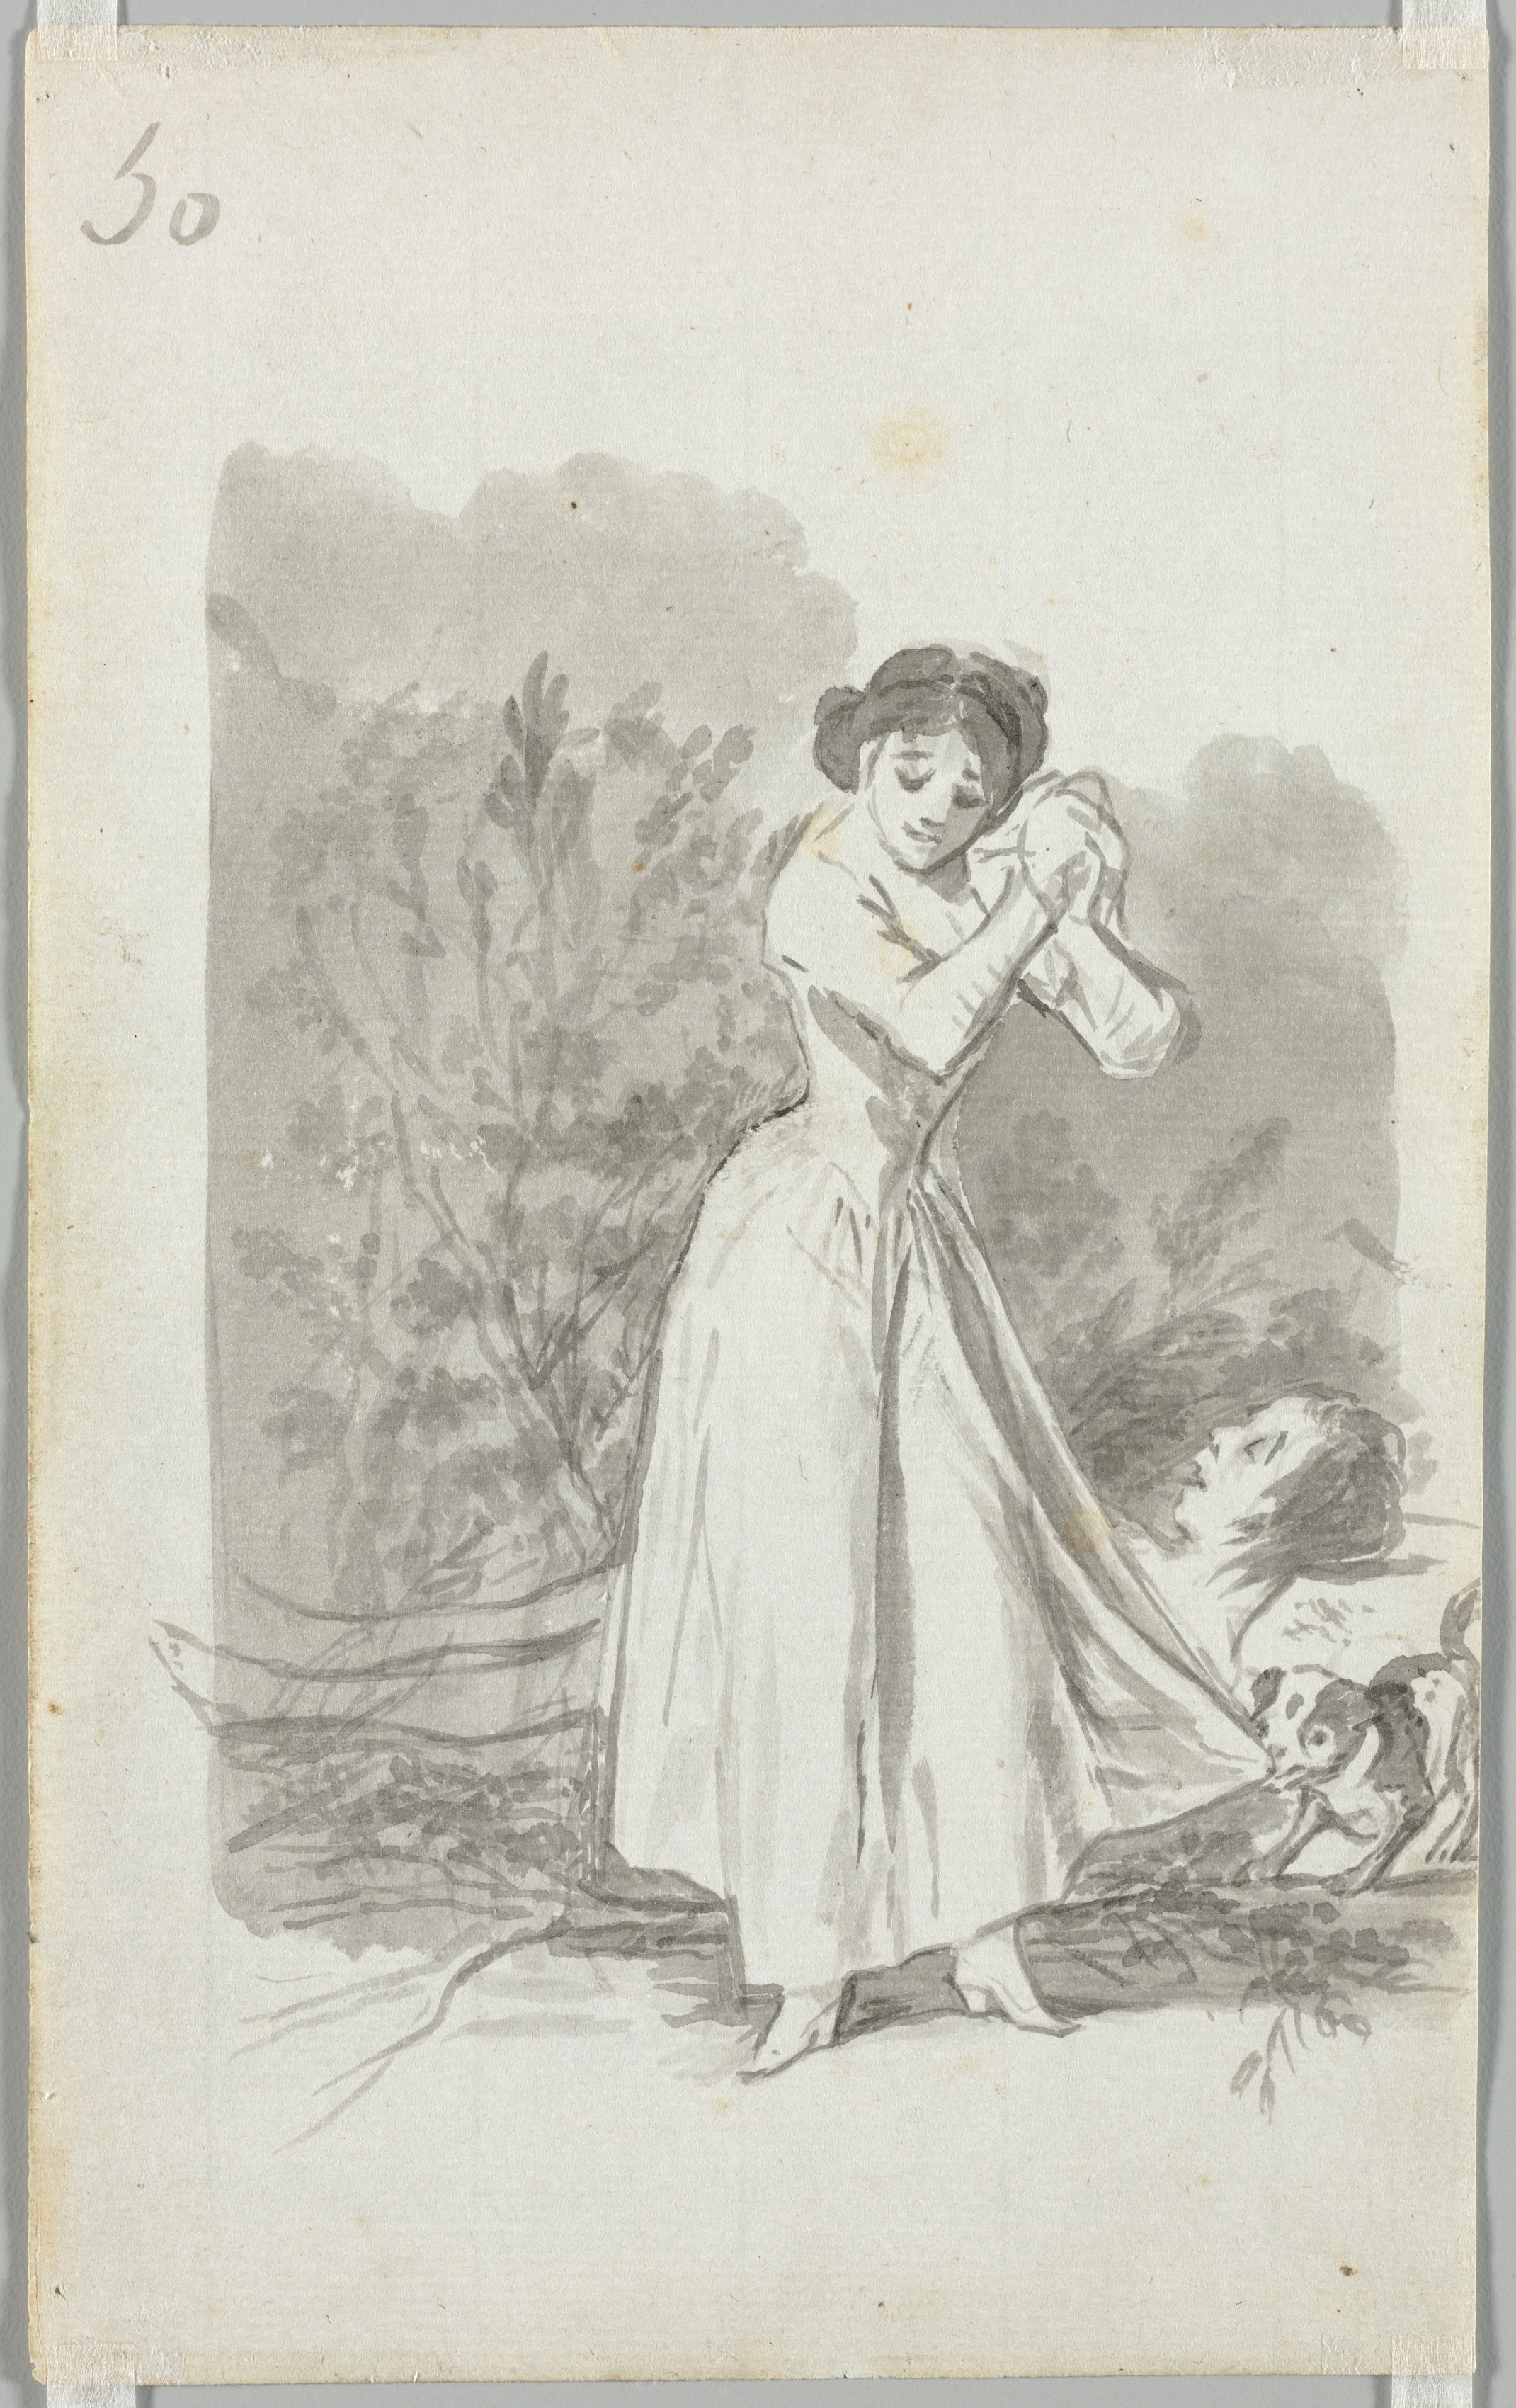 Young Woman Wringing Her Hands over a Man's Naked Body (verso)